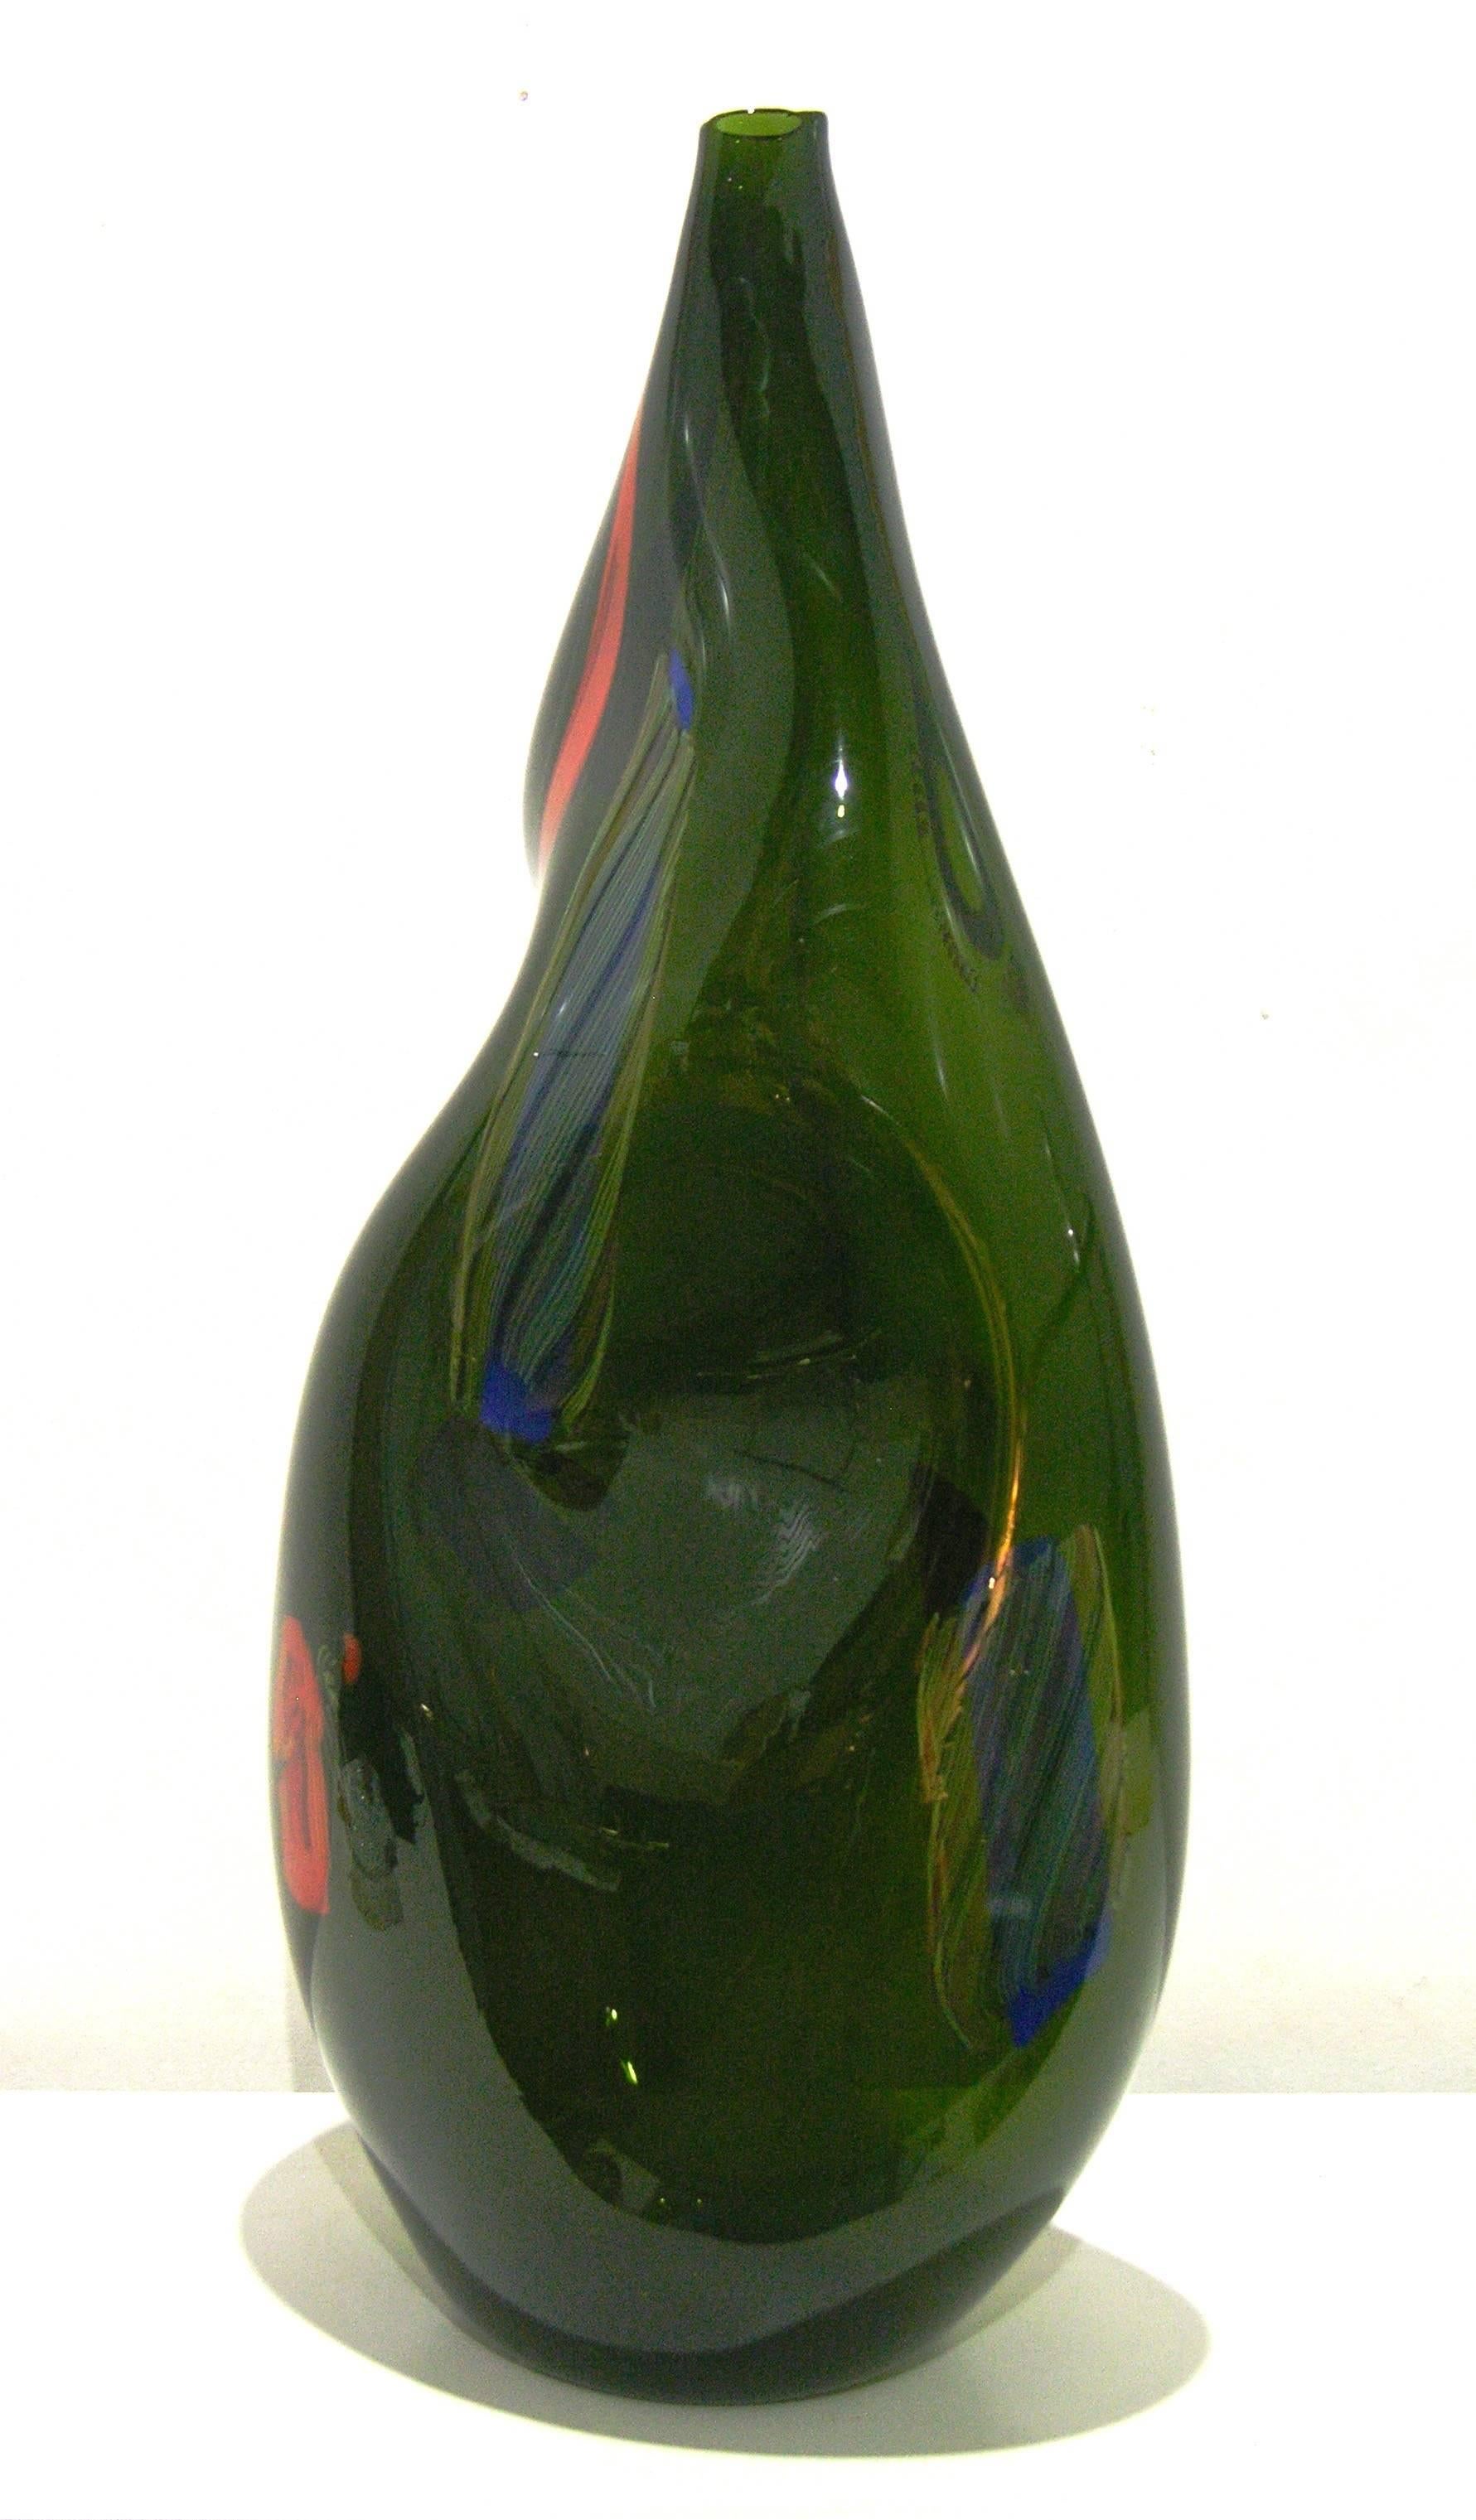 Italian Murano glass vase, contemporary work of art signed by Davide Dona.'
The modern execution is extraordinary and reveals mastership in glass blowing and decorative techniques. Some of Davide's works are displayed at the Murano Glass Museum. The